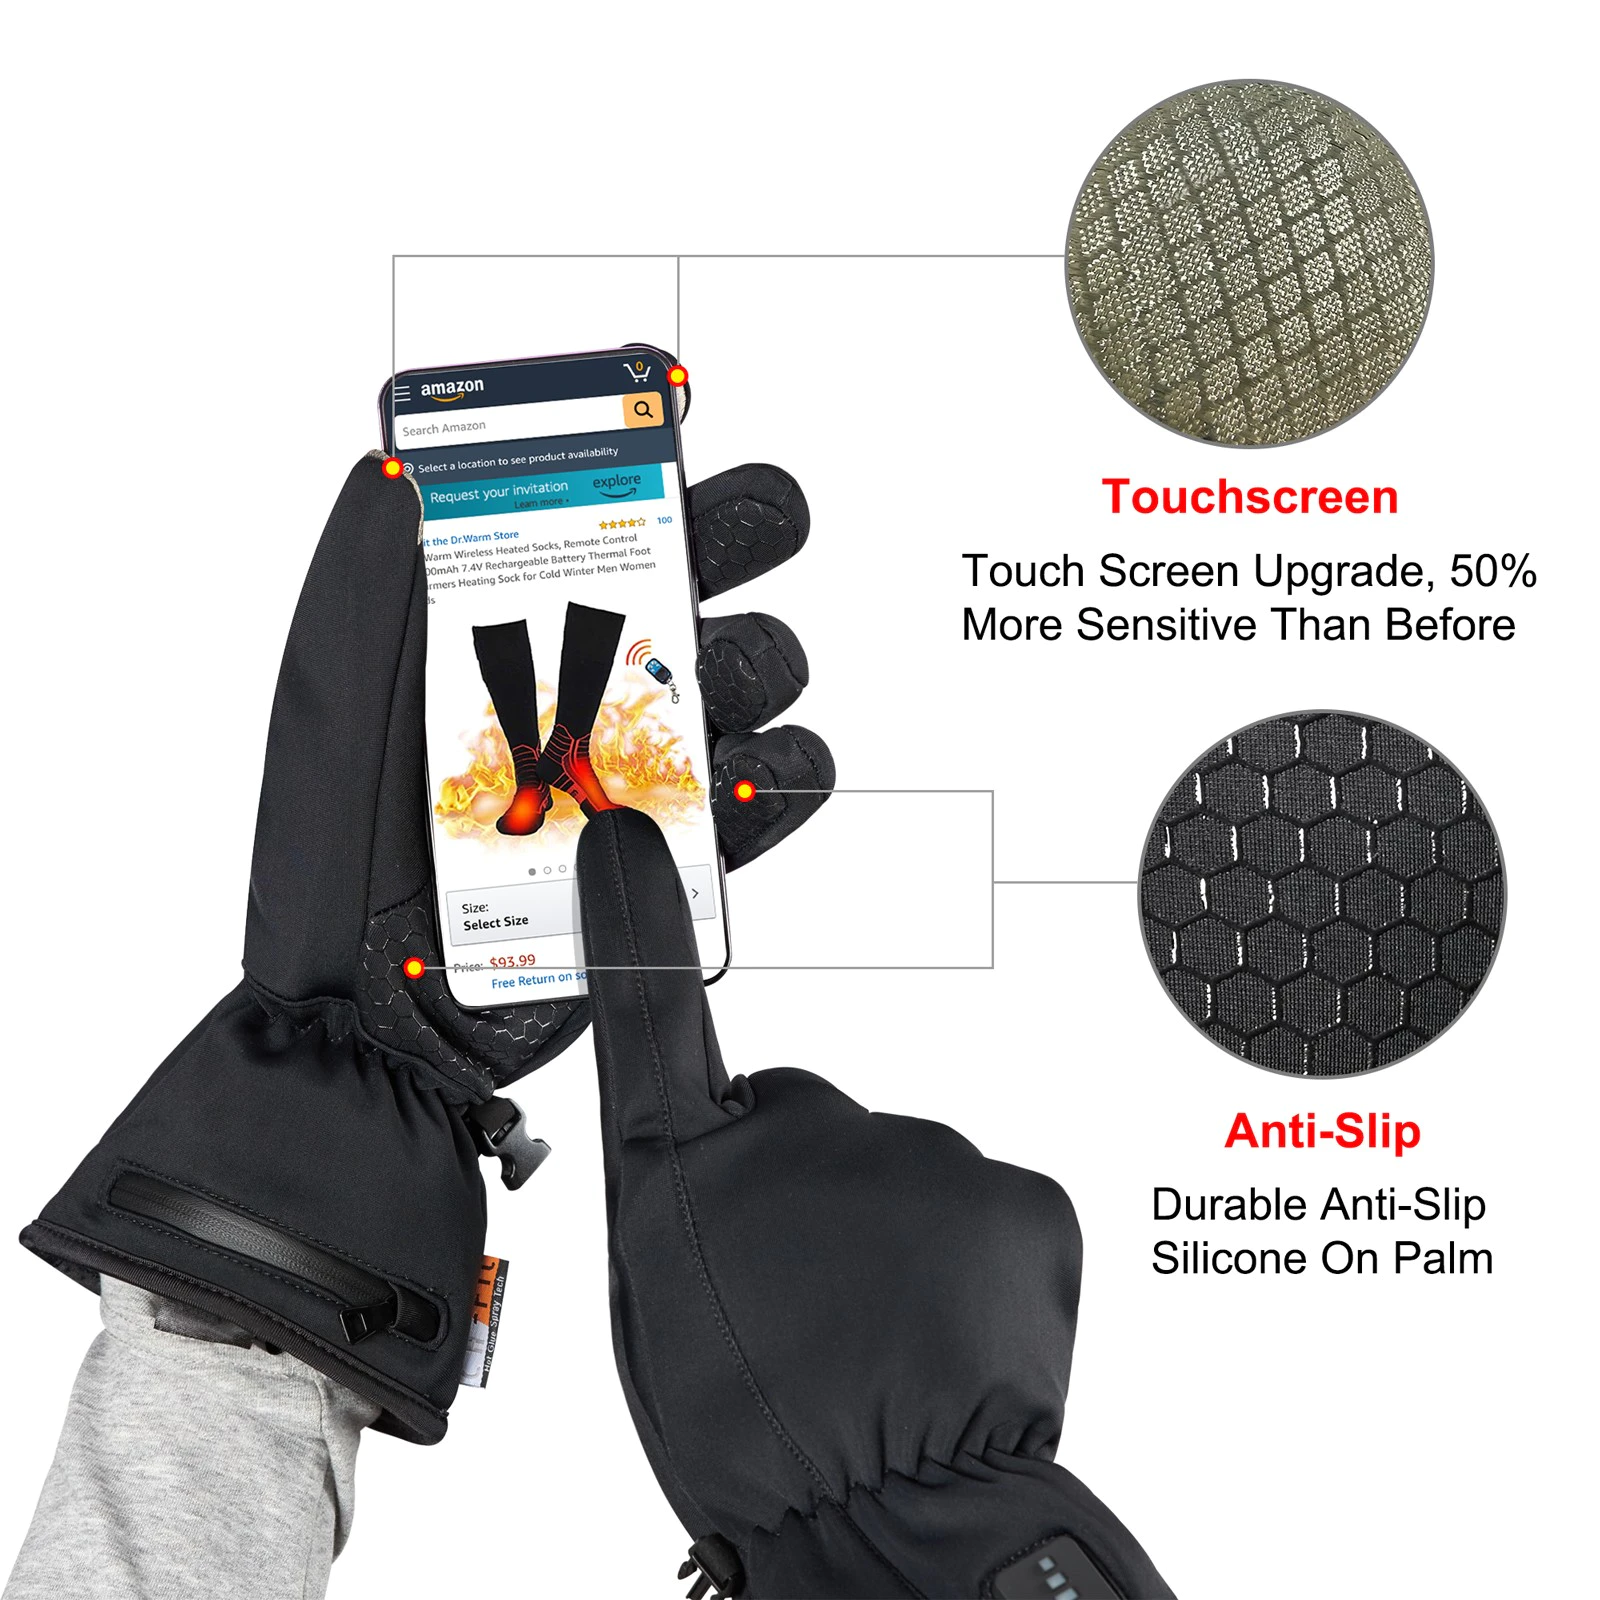 Dr. Warm winter electrical hand gloves for home